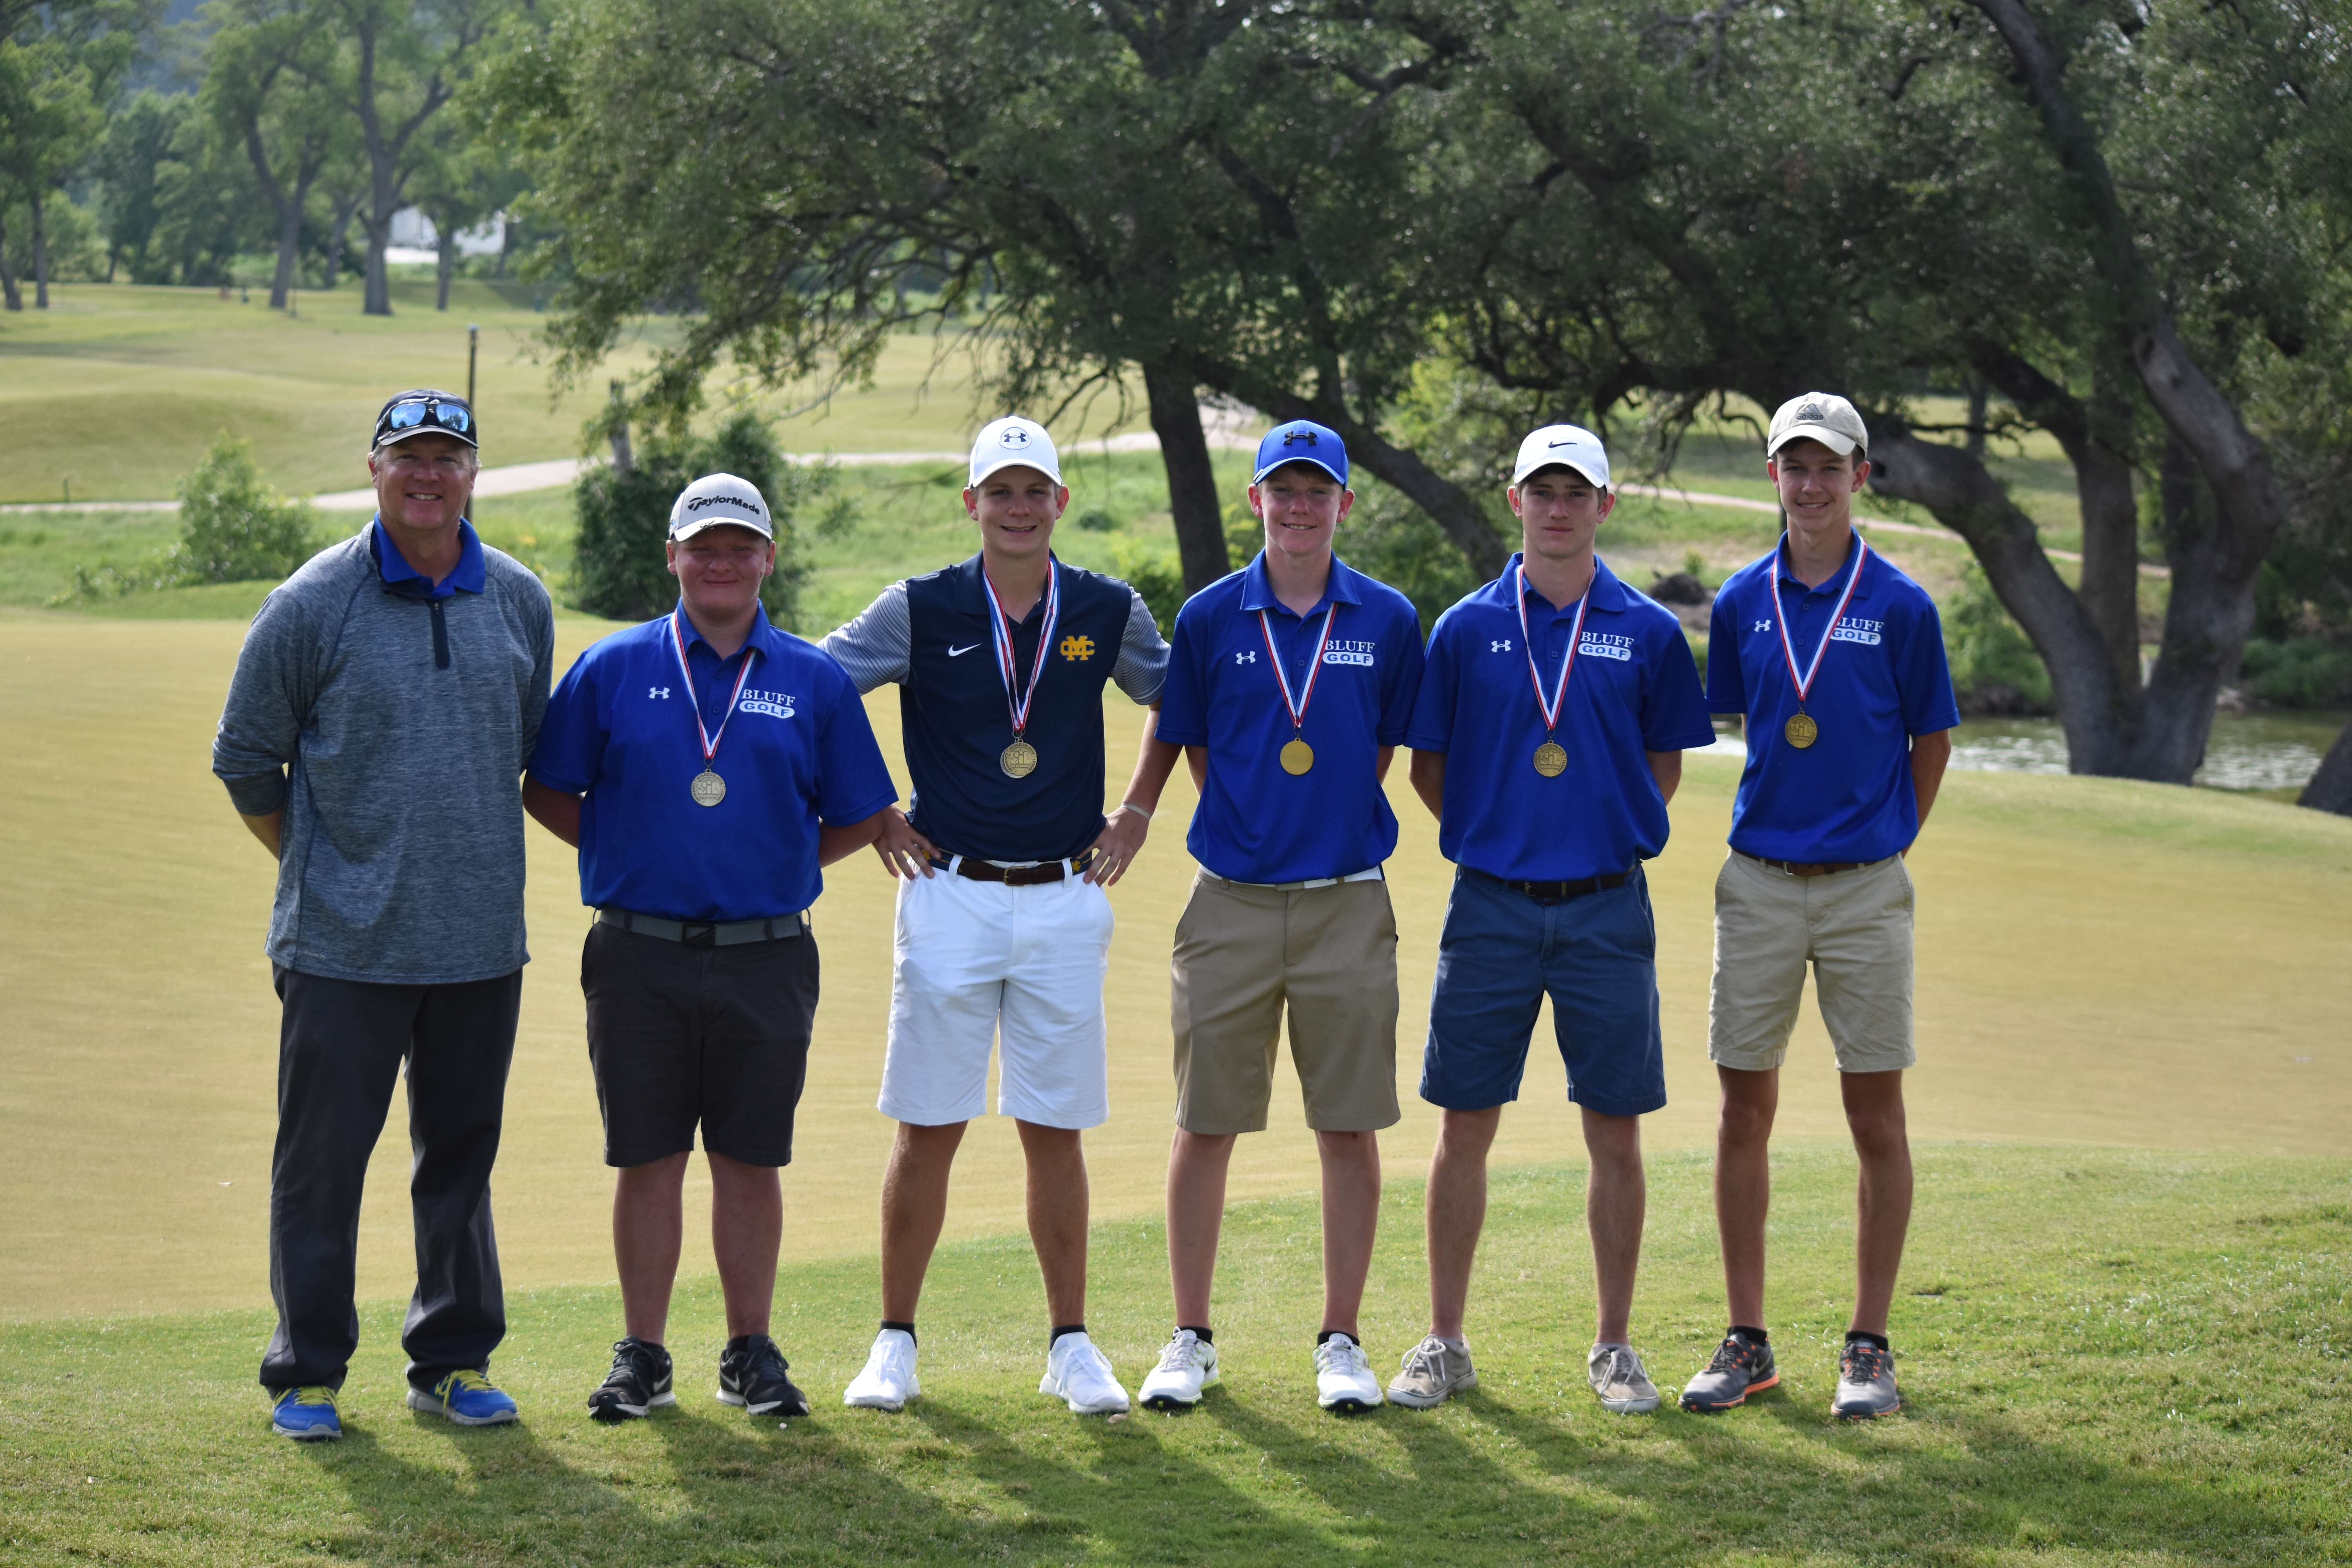 Sulphur Bluff Golf Team Places 6th at State Tournament. Kaleb Brown Finishes 6th in Individual Competition.